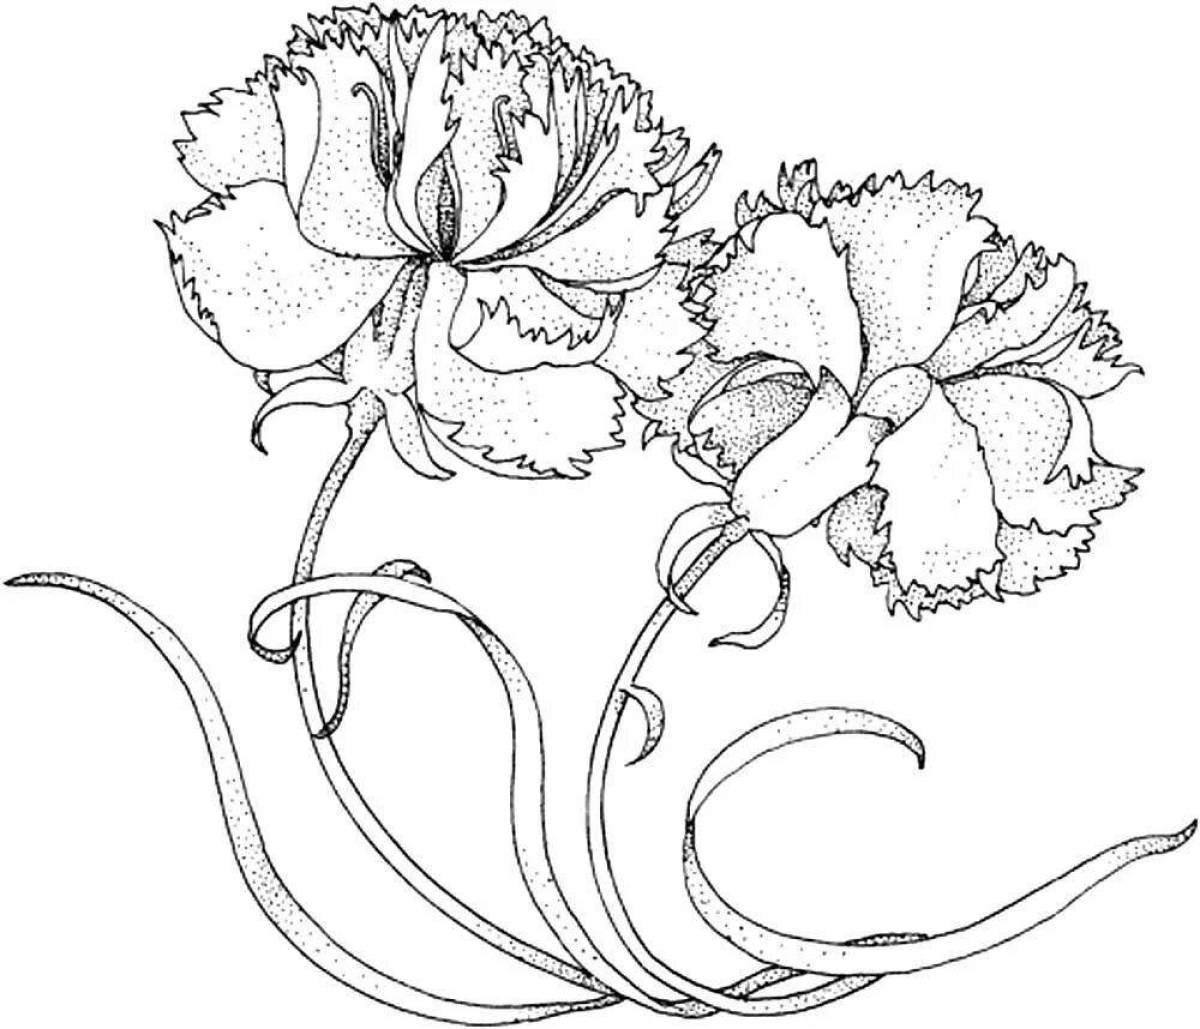 Coloring book shiny 2 carnations